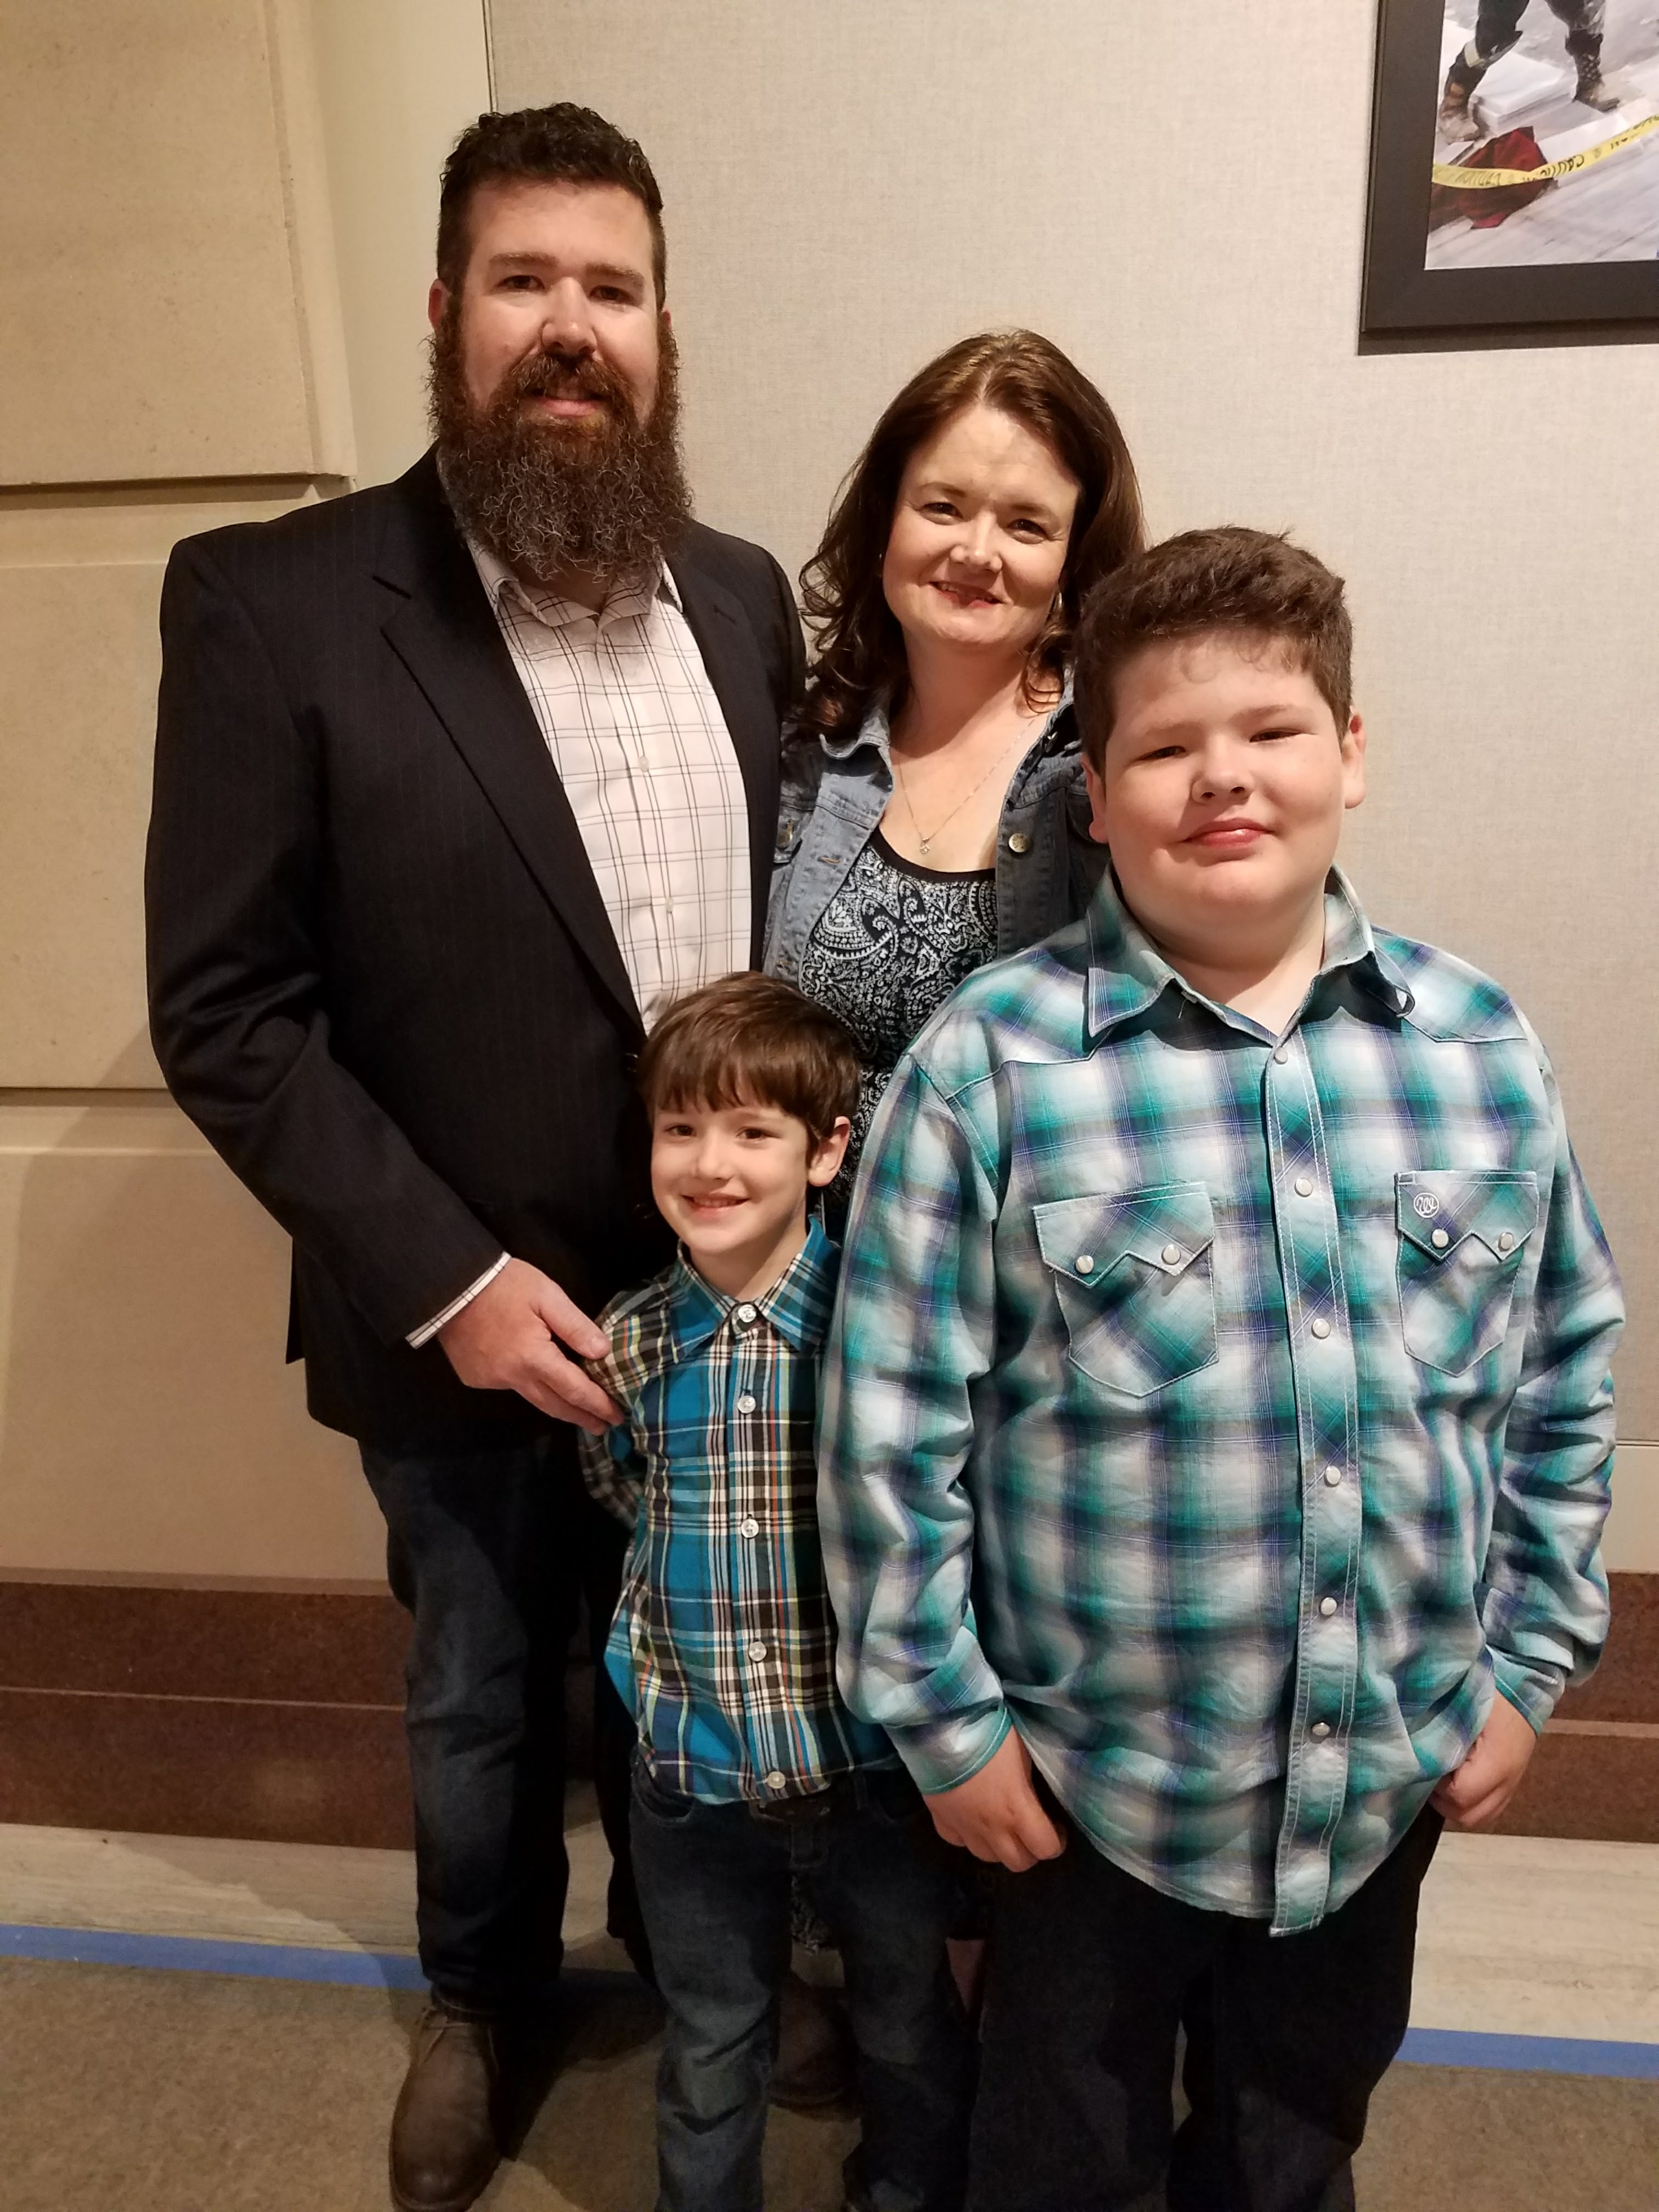 Teacher Casey Satterlee stands with his wife, Lisa, and sons, Ayden and Lewis, on the day he filed to run for office during the teacher walkout in Oklahoma. (Courtesy of Casey Satterlee)